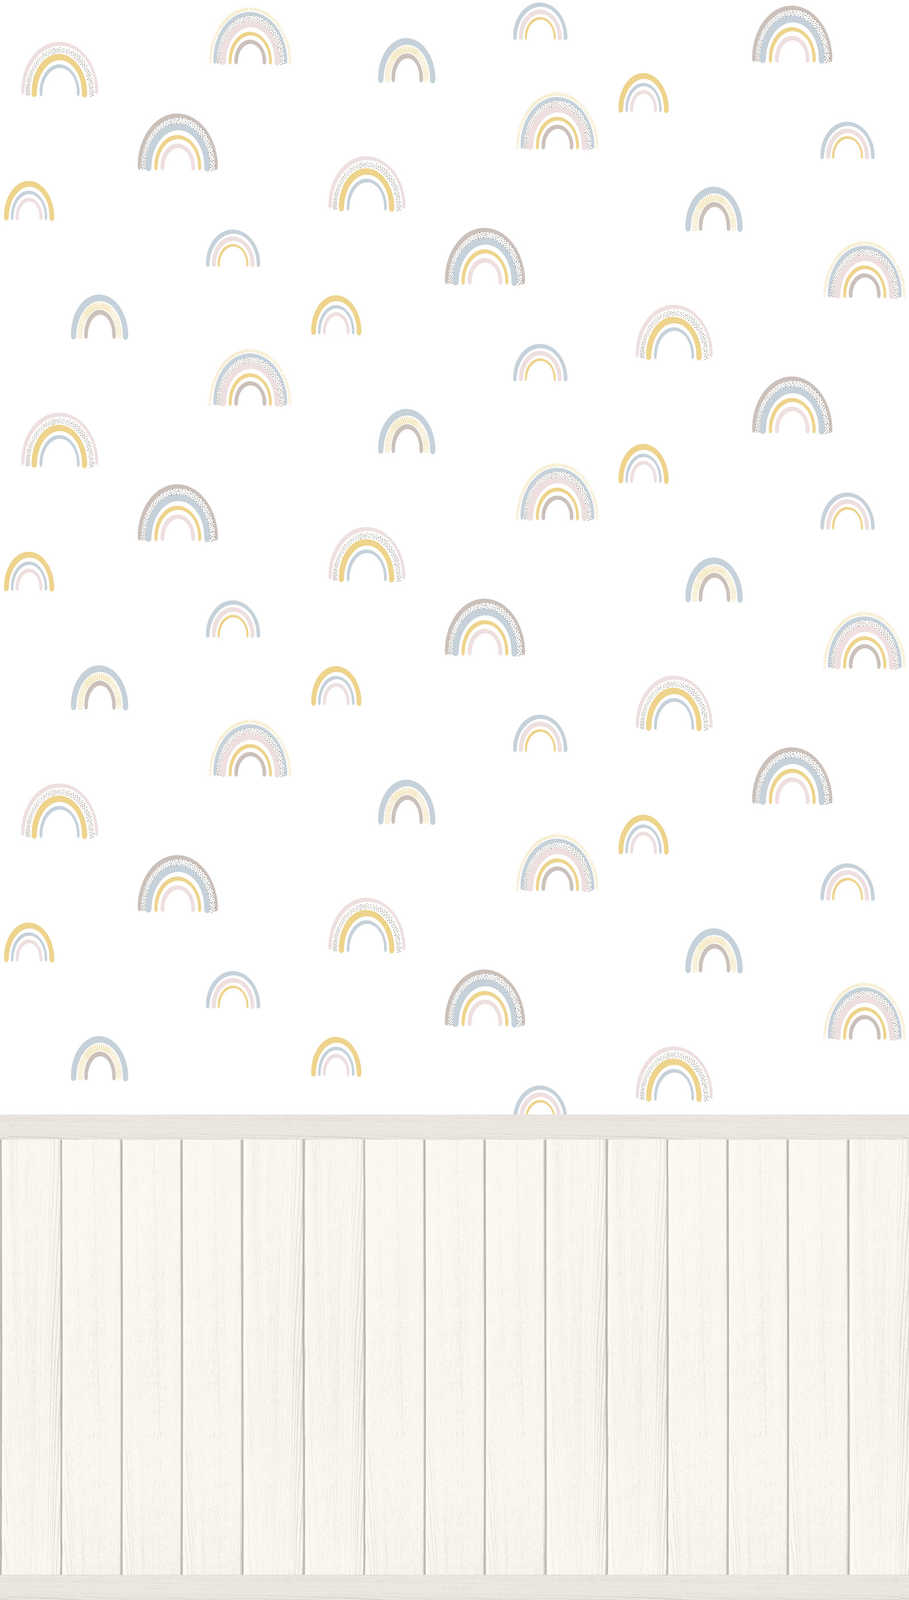             Non-woven motif wallpaper with wood-effect plinth border and rainbow pattern - white, grey, colourful
        